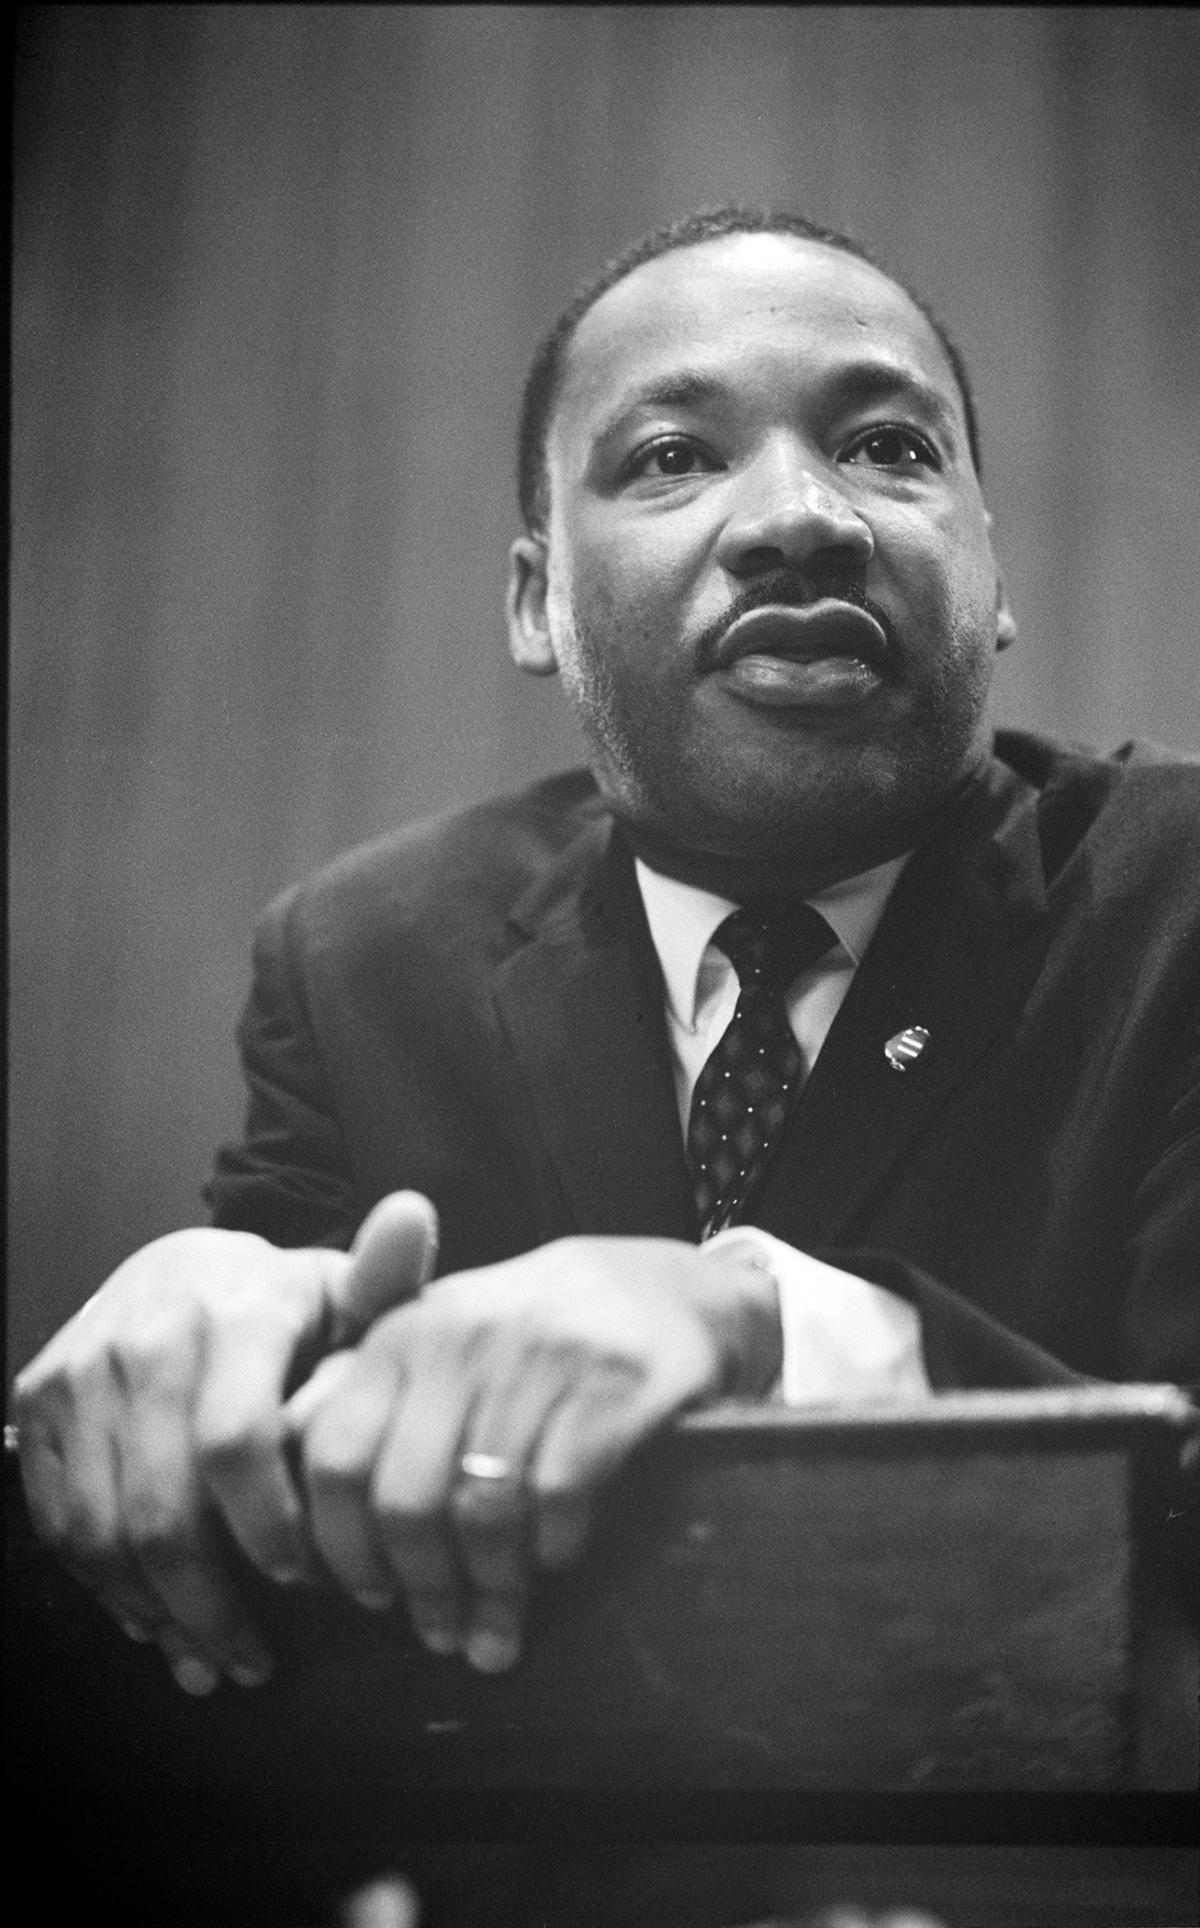 Black and white picture of Martin Luther King Jr. leaning on a podium